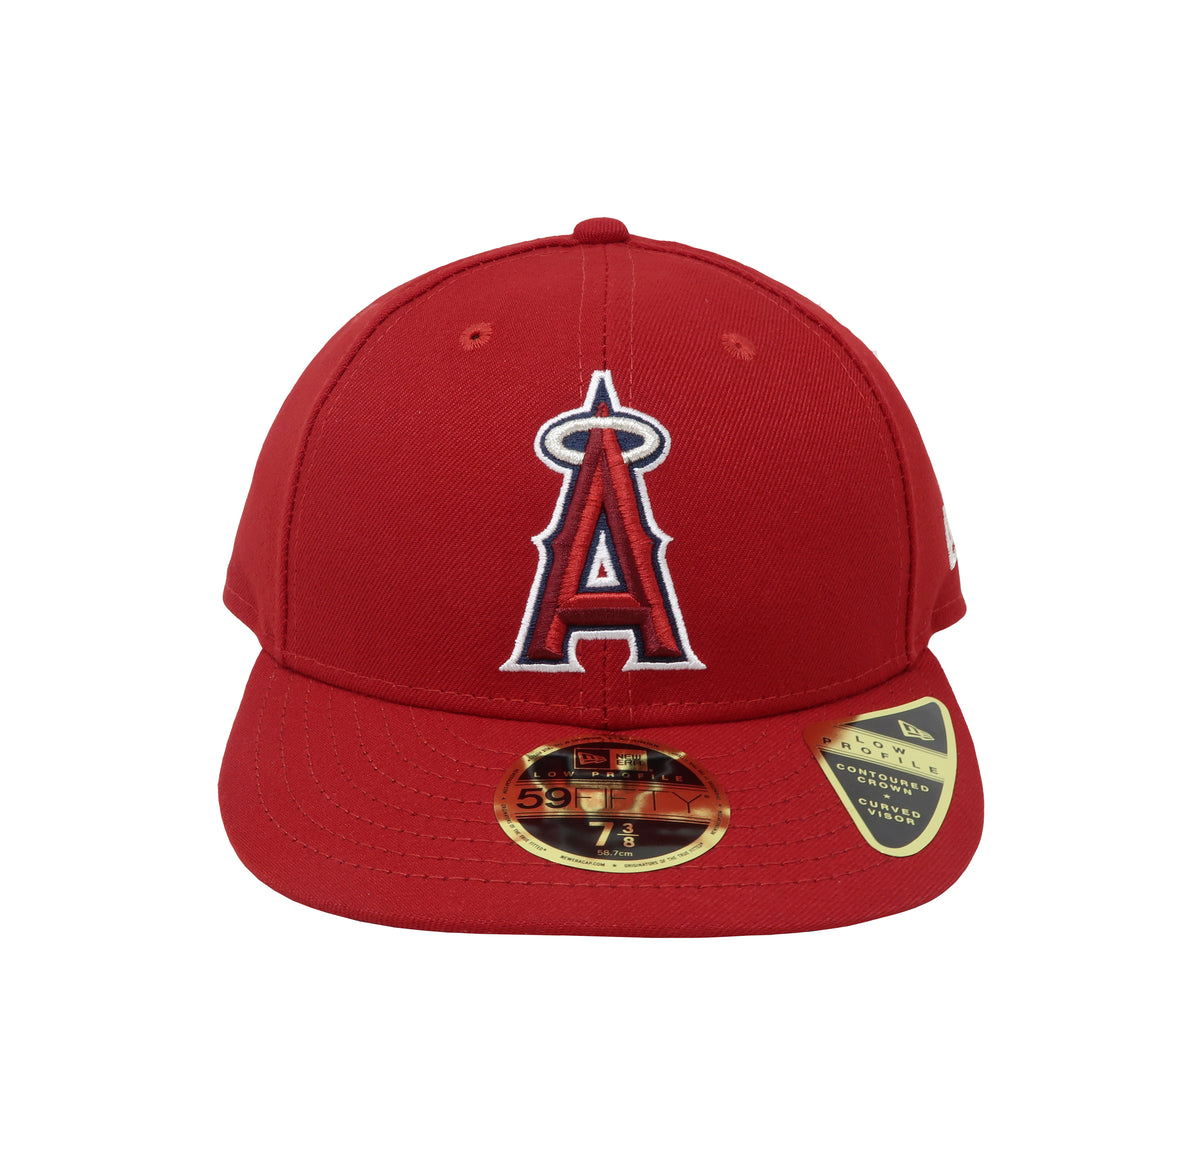 Los Angeles Angels New Era Black & White Low Profile 59FIFTY